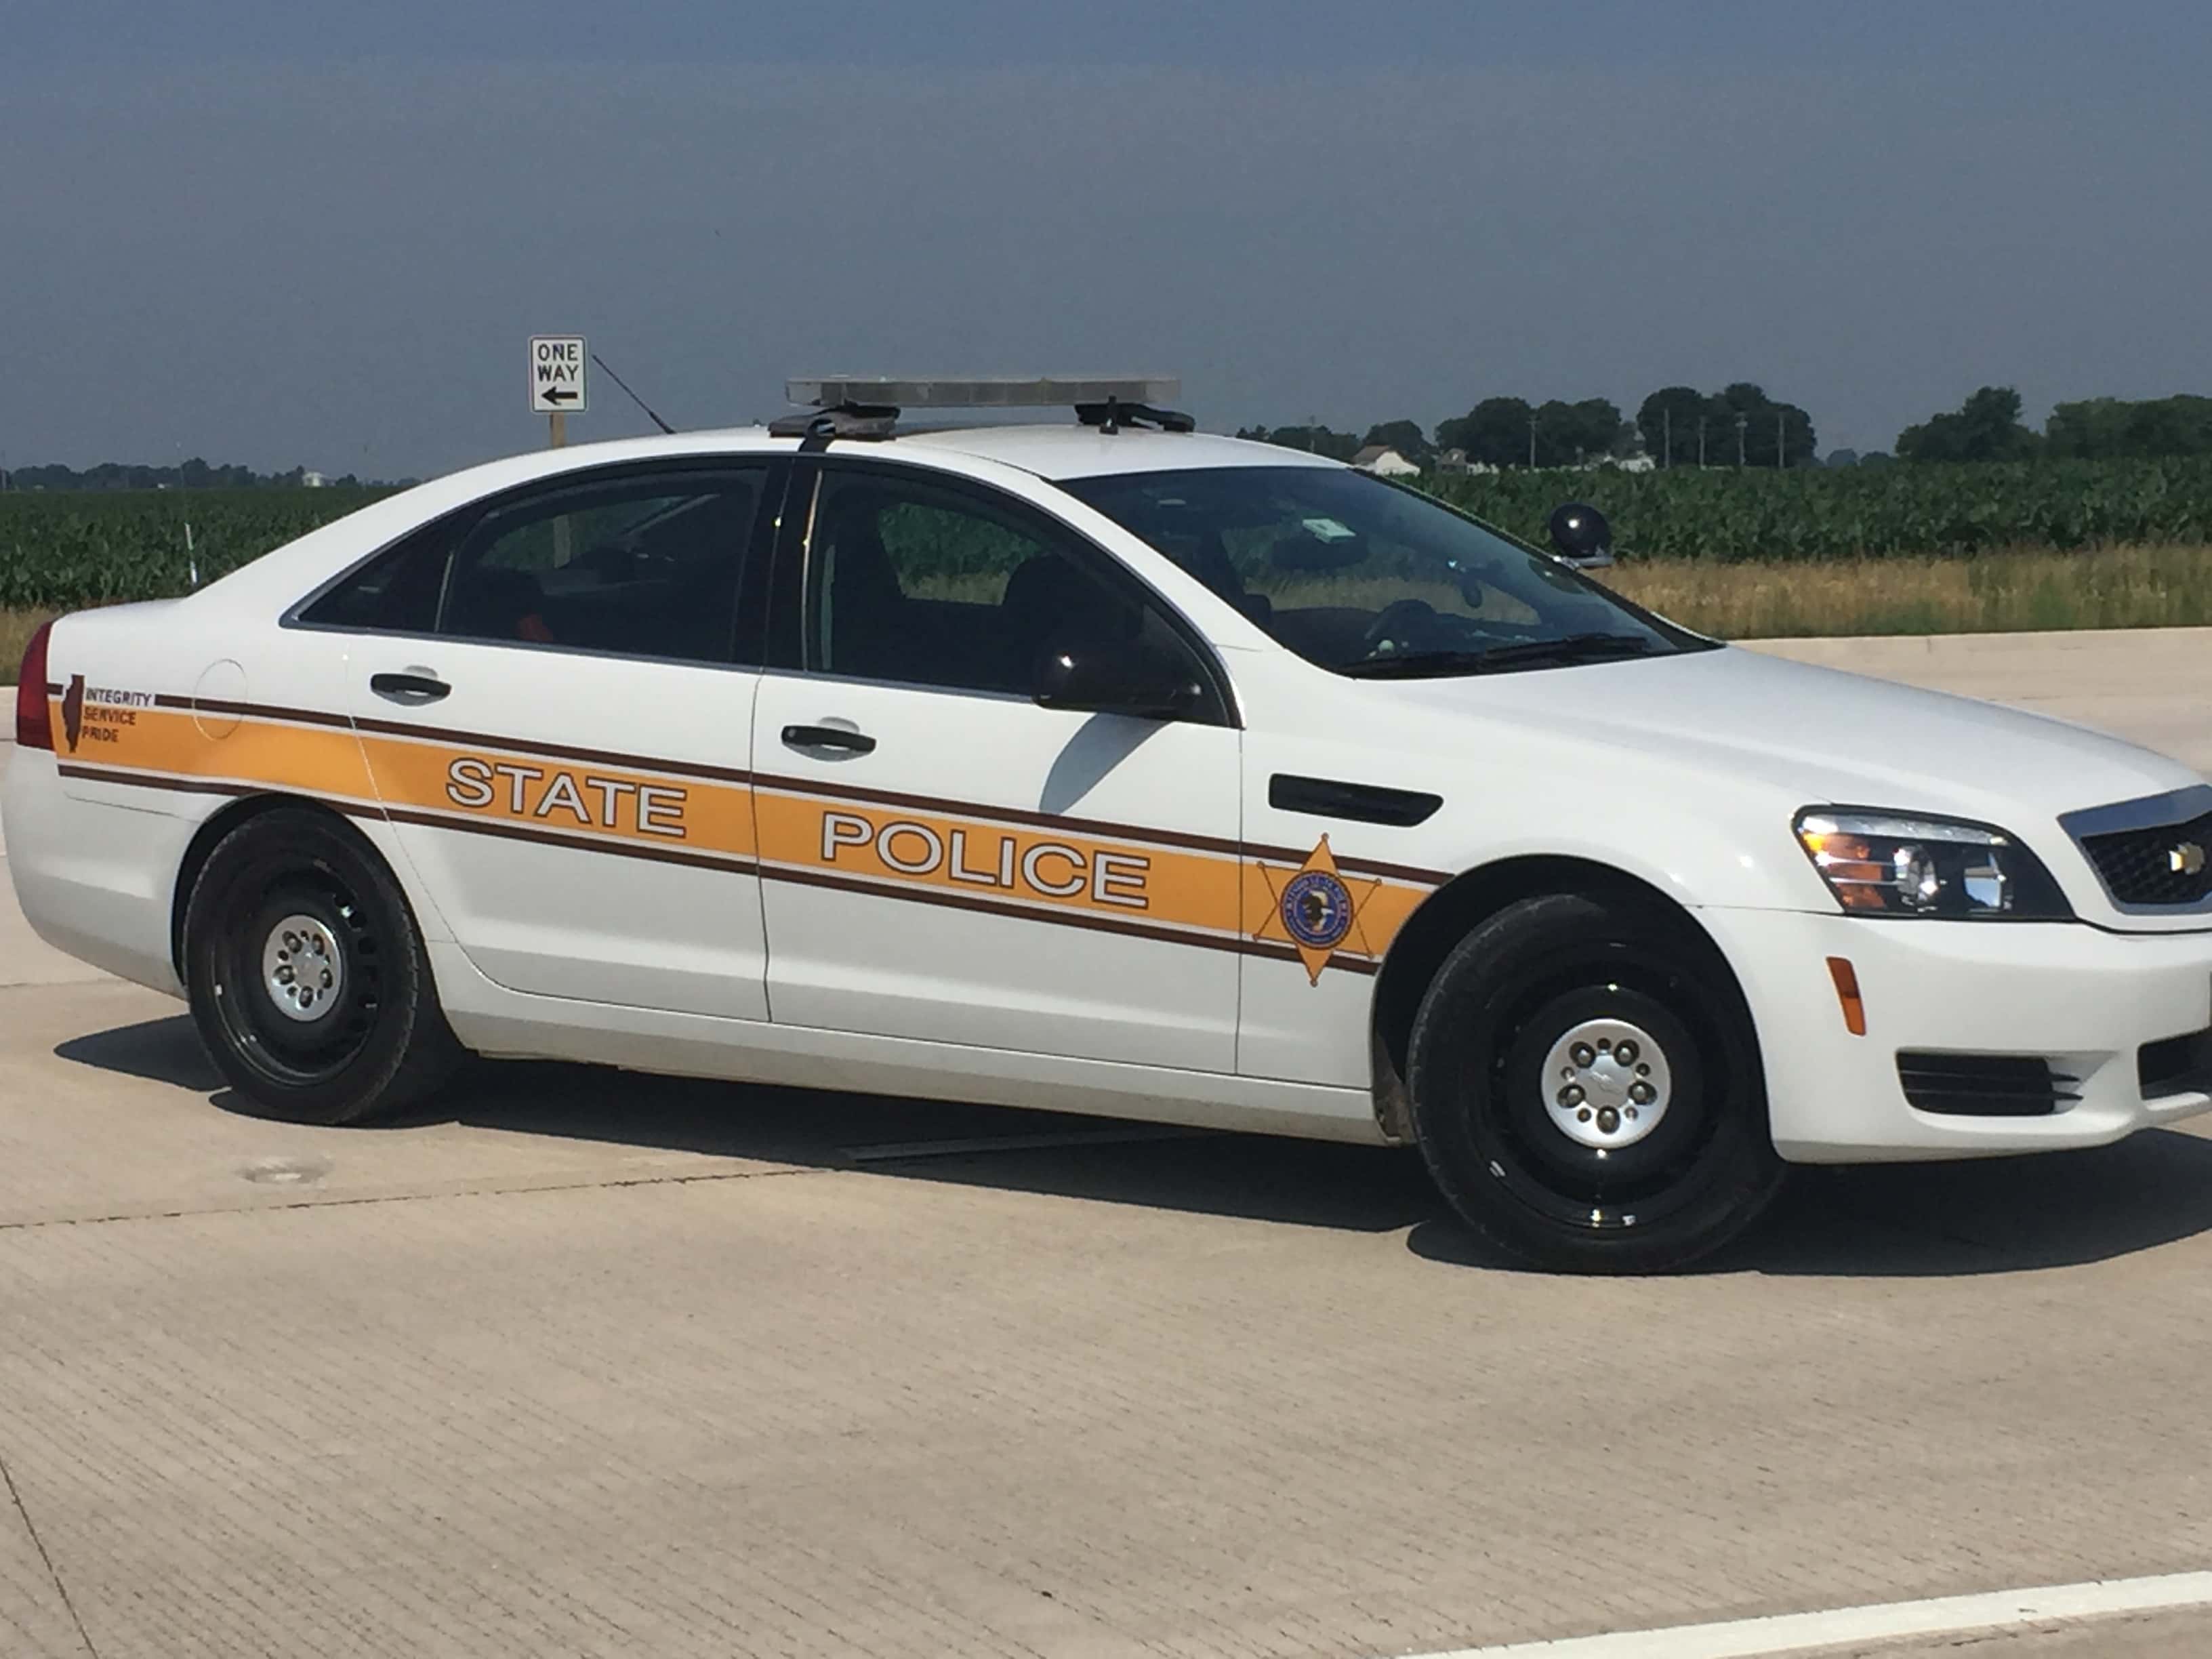 state police illinois county lasalle month checks roadside safety perform studstill file